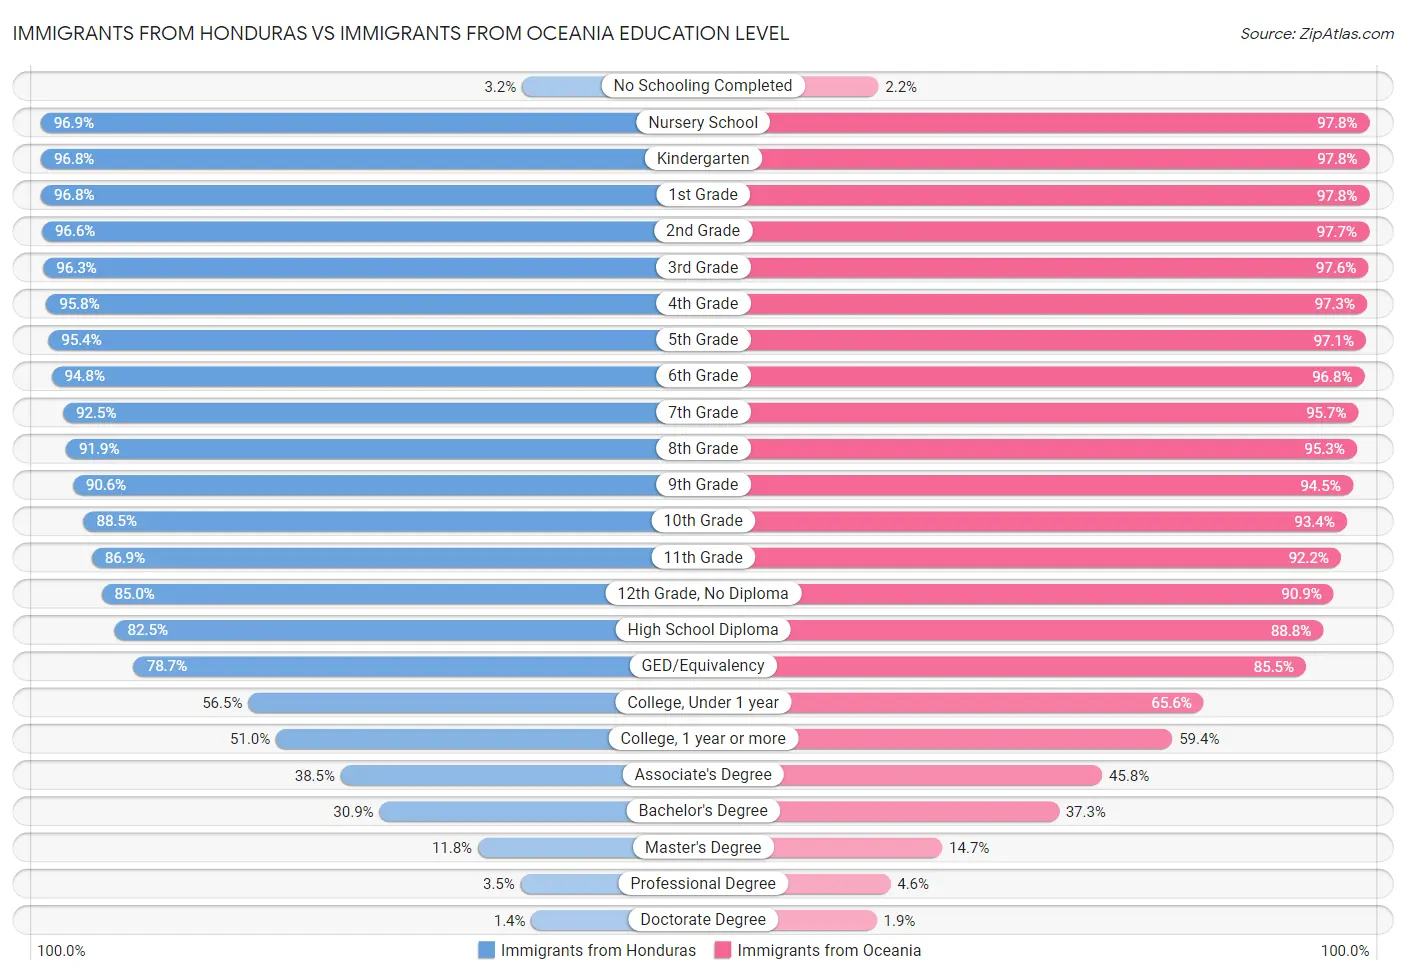 Immigrants from Honduras vs Immigrants from Oceania Education Level